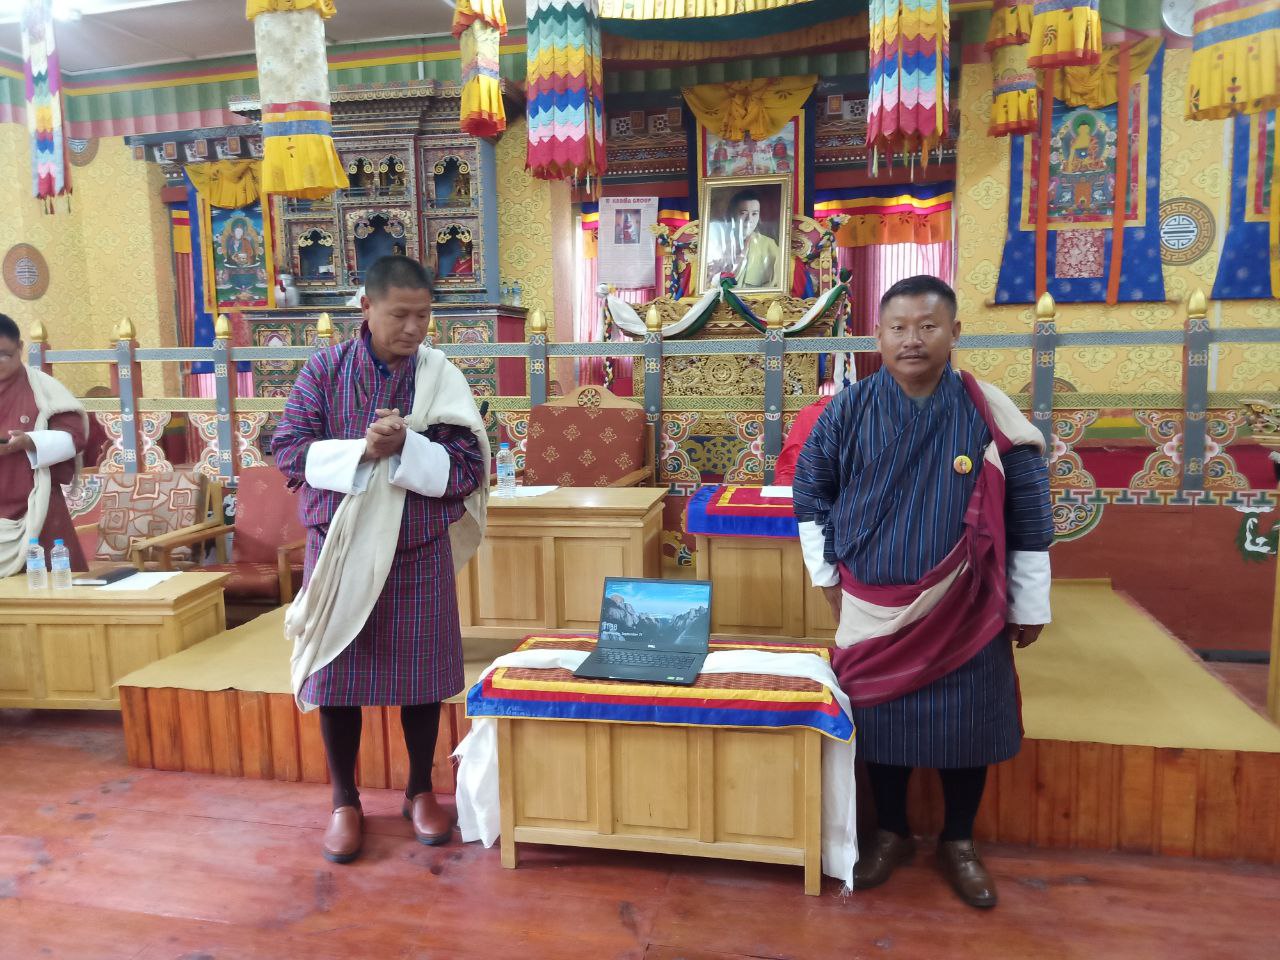 The handover ceremony of ‘The Project for Reconstruction of Irrigation Channels in Jamkhar Gewog, Trashiyangtse,’ under the Grant Assistance for Grassroots Human Security Projects (GGP) scheme was held online on September 21, 2022.